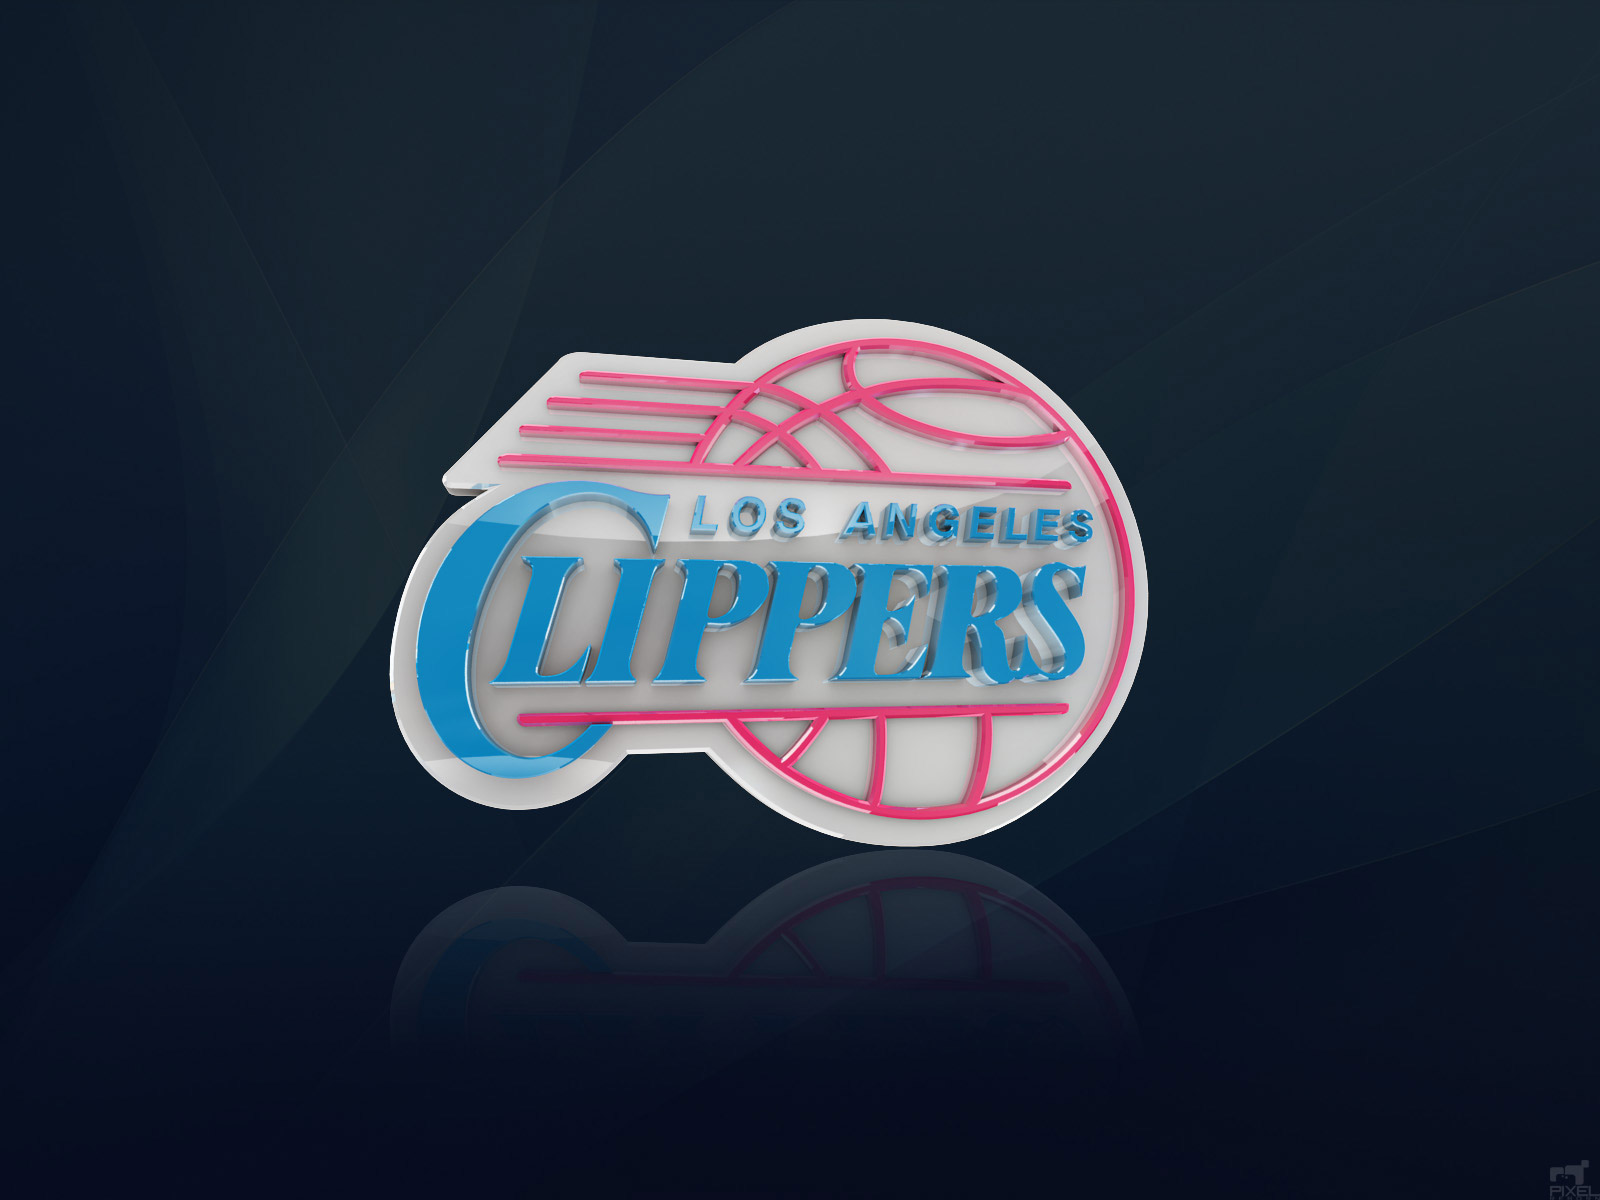 Los Angeles Clippers Wallpaper Image Graphics Ments And